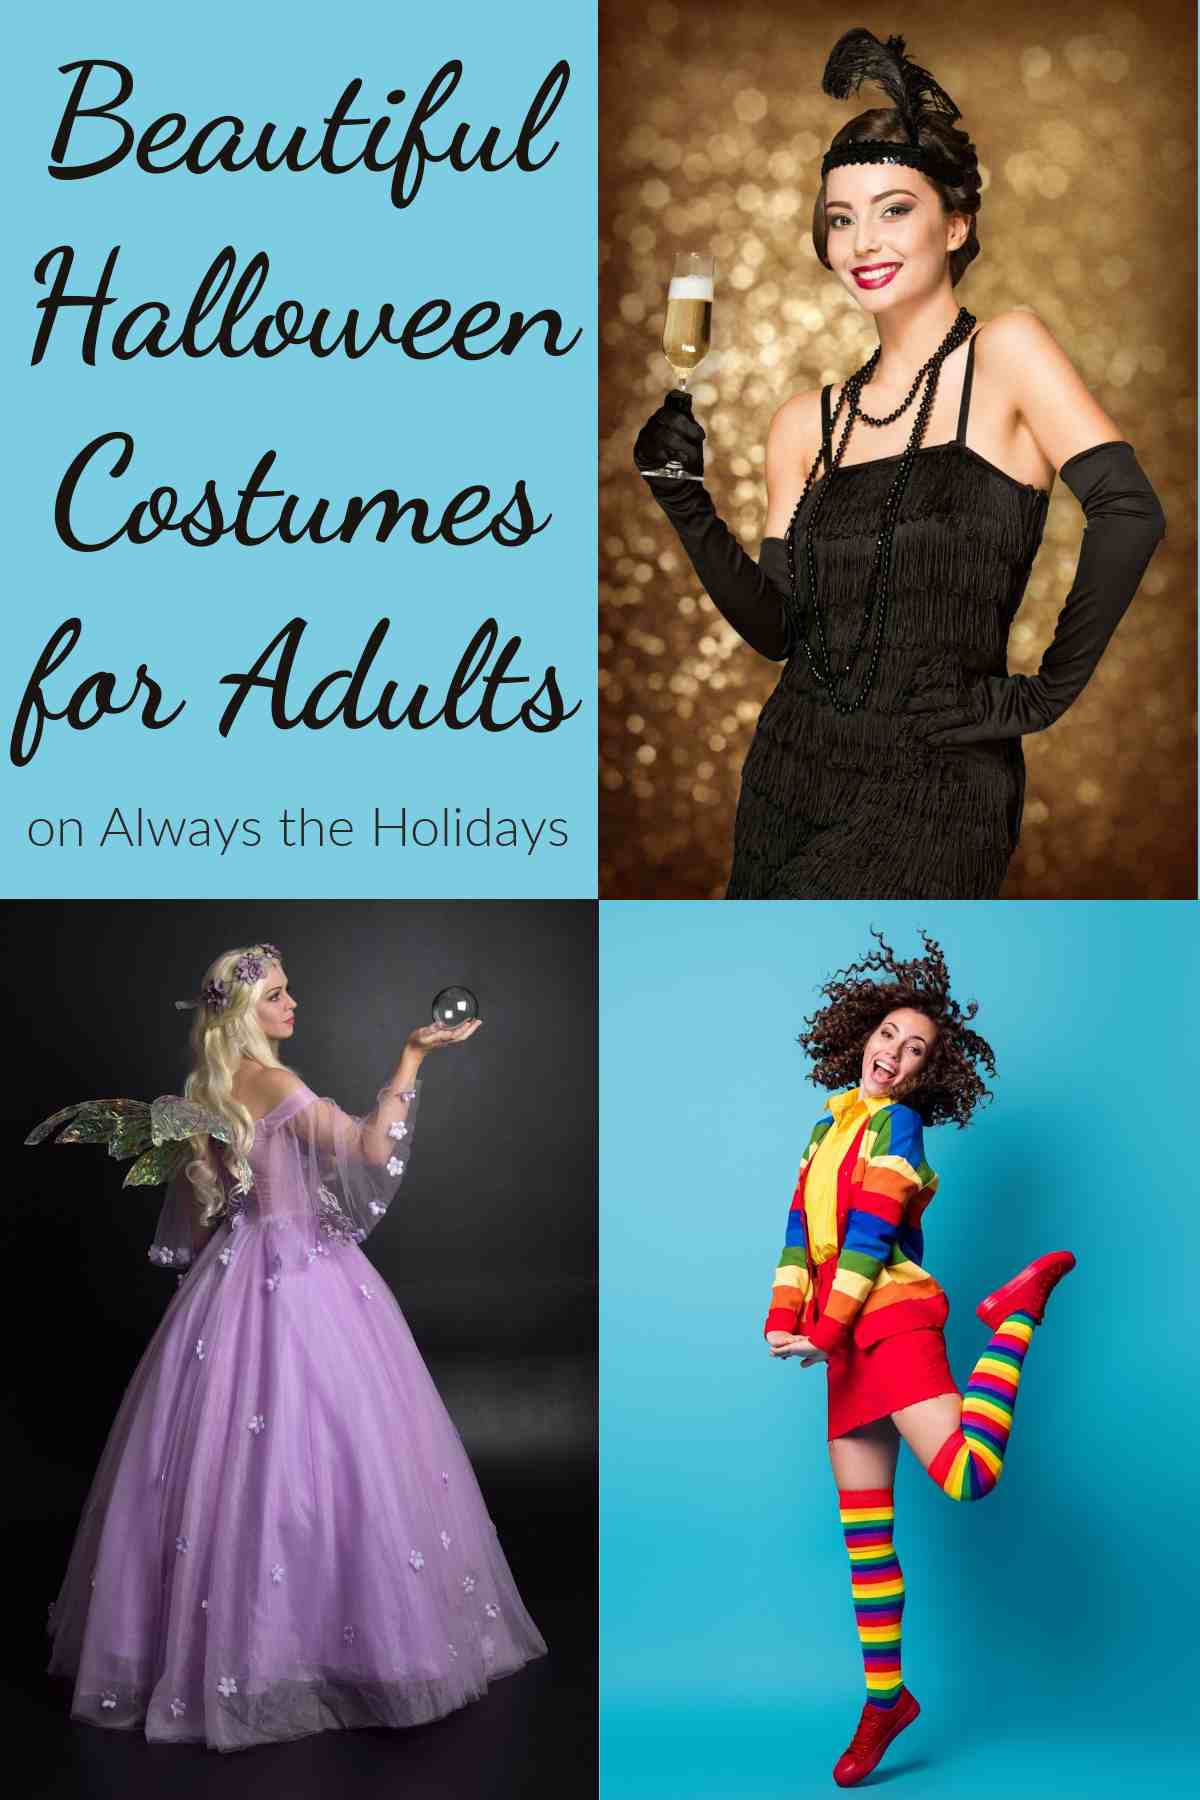 Four squares, the top left has text that says "beautiful Halloween costumes for adults", the top right has a DIY flapper costume, the bottom left has a homemade fairy costume, and the bottom right has a rainbow costume DIY version, all the costumes are being worn by women.